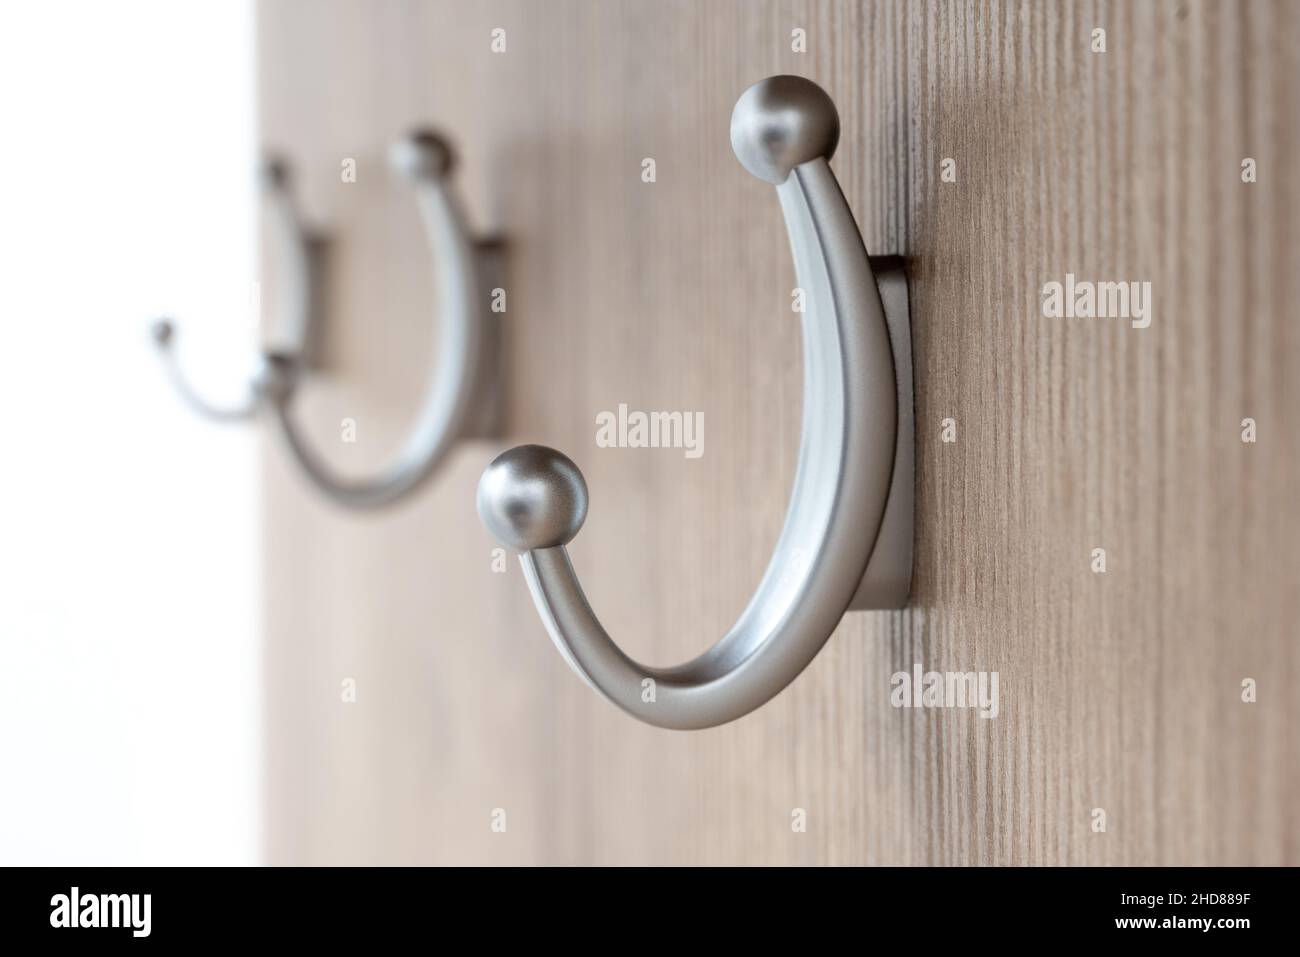 Three medium sized, silver colored coat hangers attached to a wooden board with focus on the first one. Home door hall equipment. Coat hangers by Stock Photo